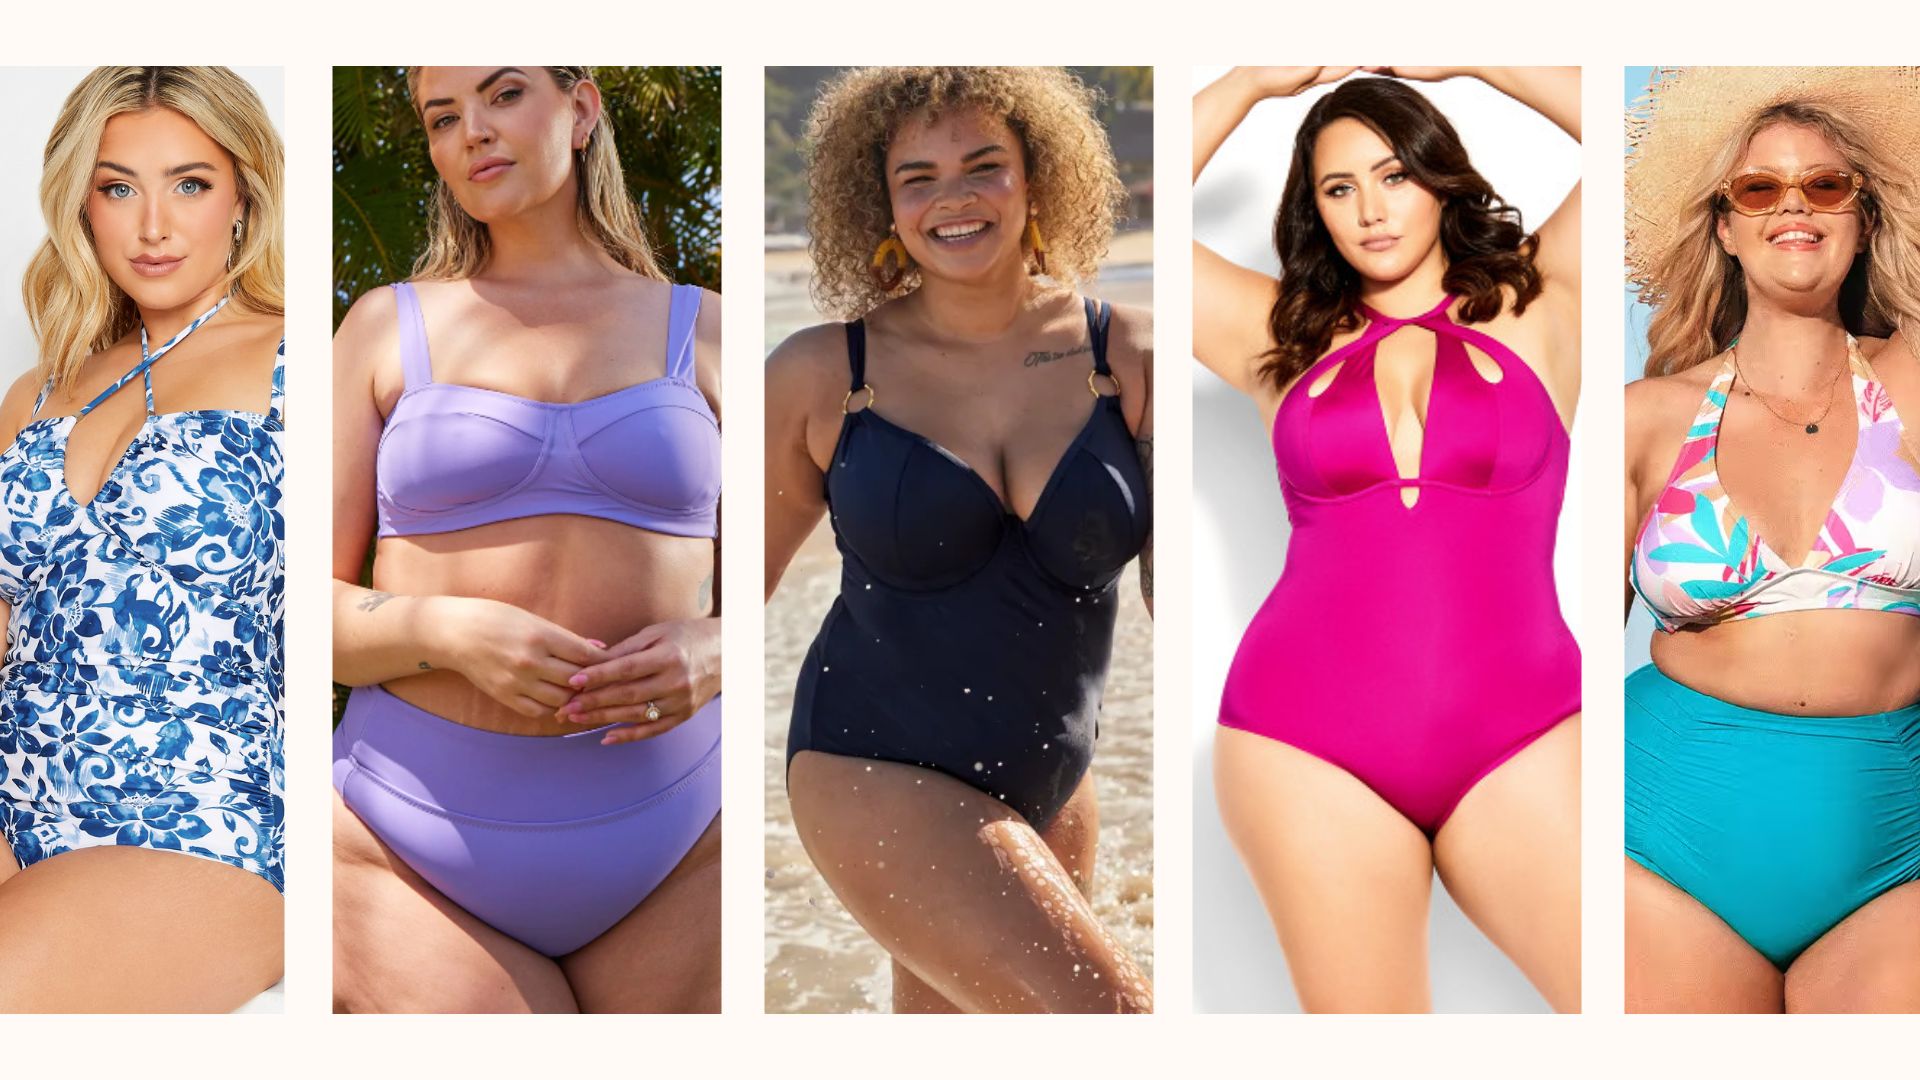 The Cupshe Bathing Suit Offers Ultimate (and Affordable) Tummy Control